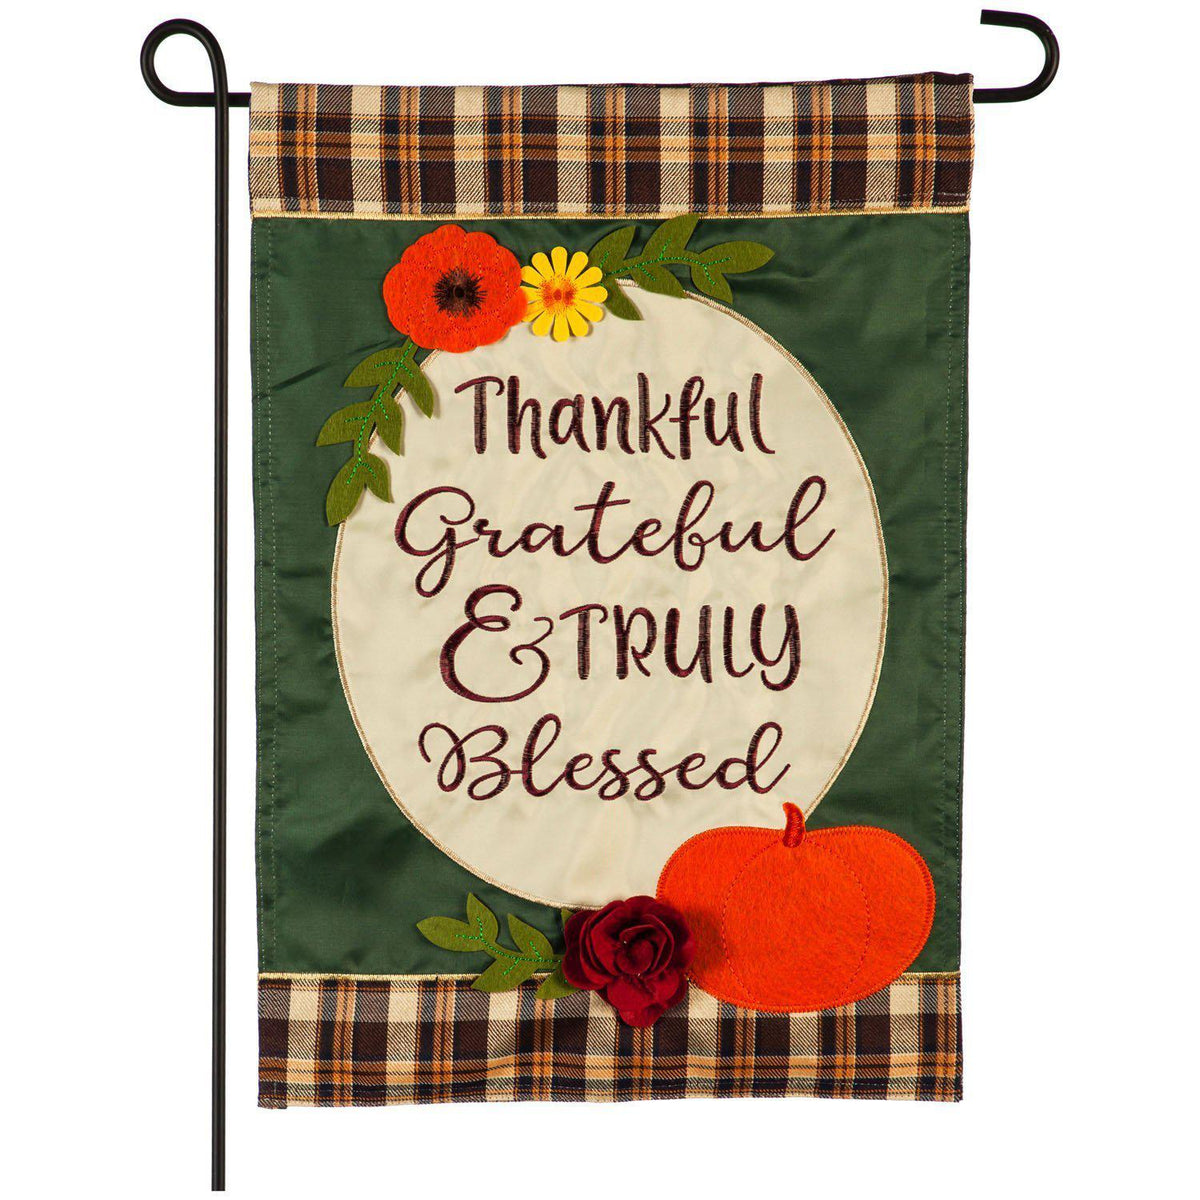 The Truly Blessed garden flag features a green background with brown plaid borders, pumpkins, flowers, and the words "Thankful, Grateful & Truly Blessed". 